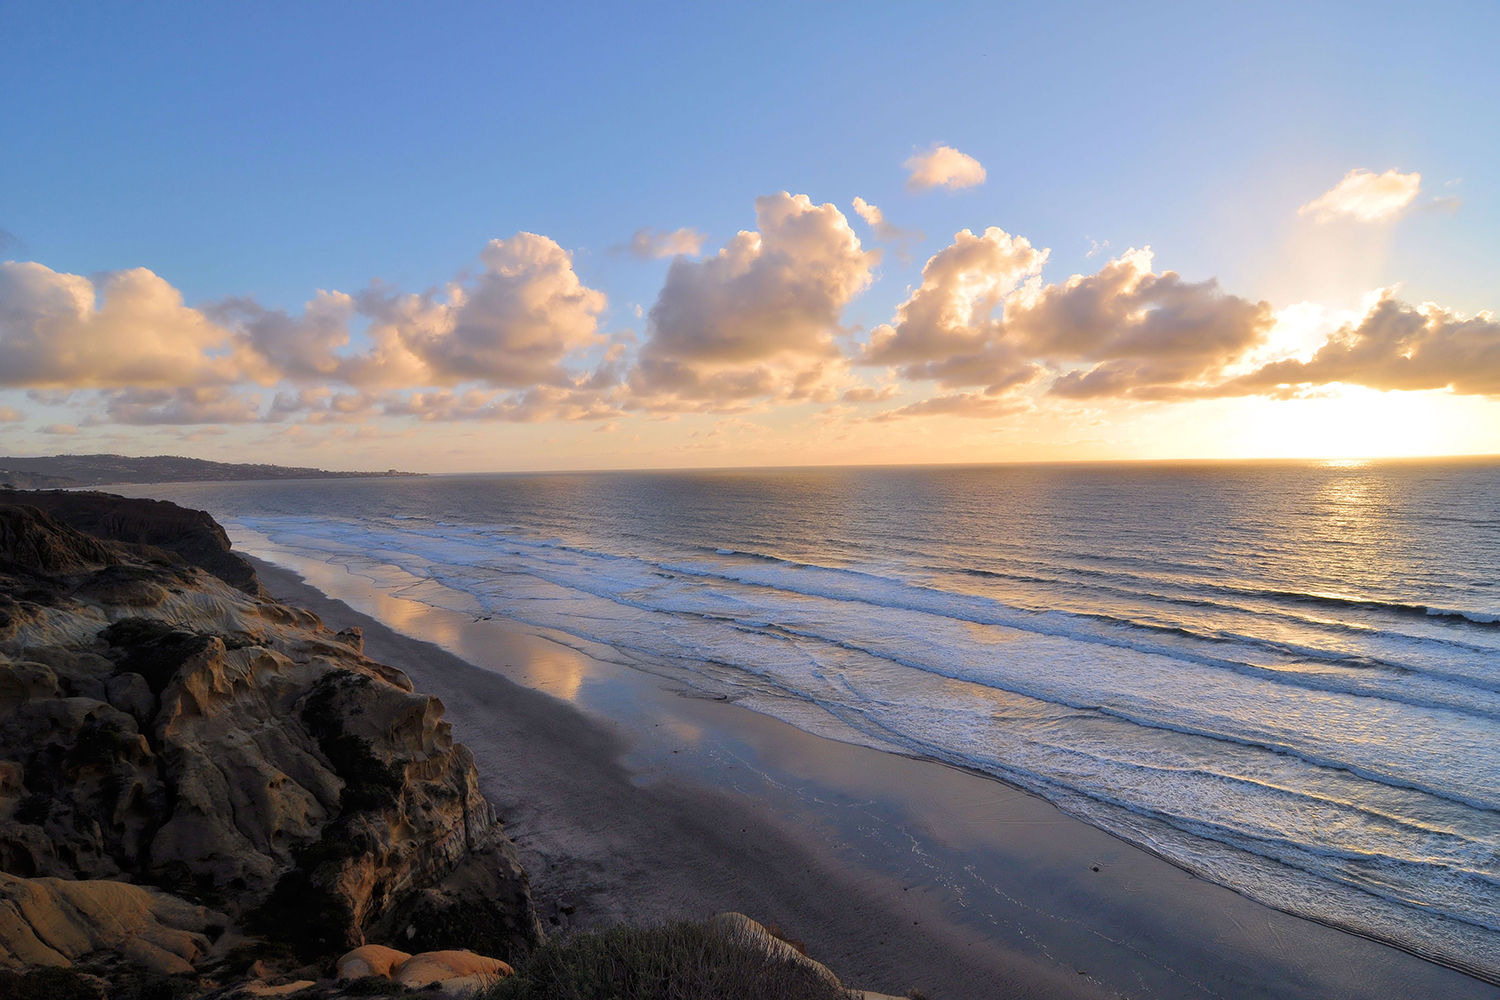 Sunset from Torrey Pines National Park, San Diego, CA